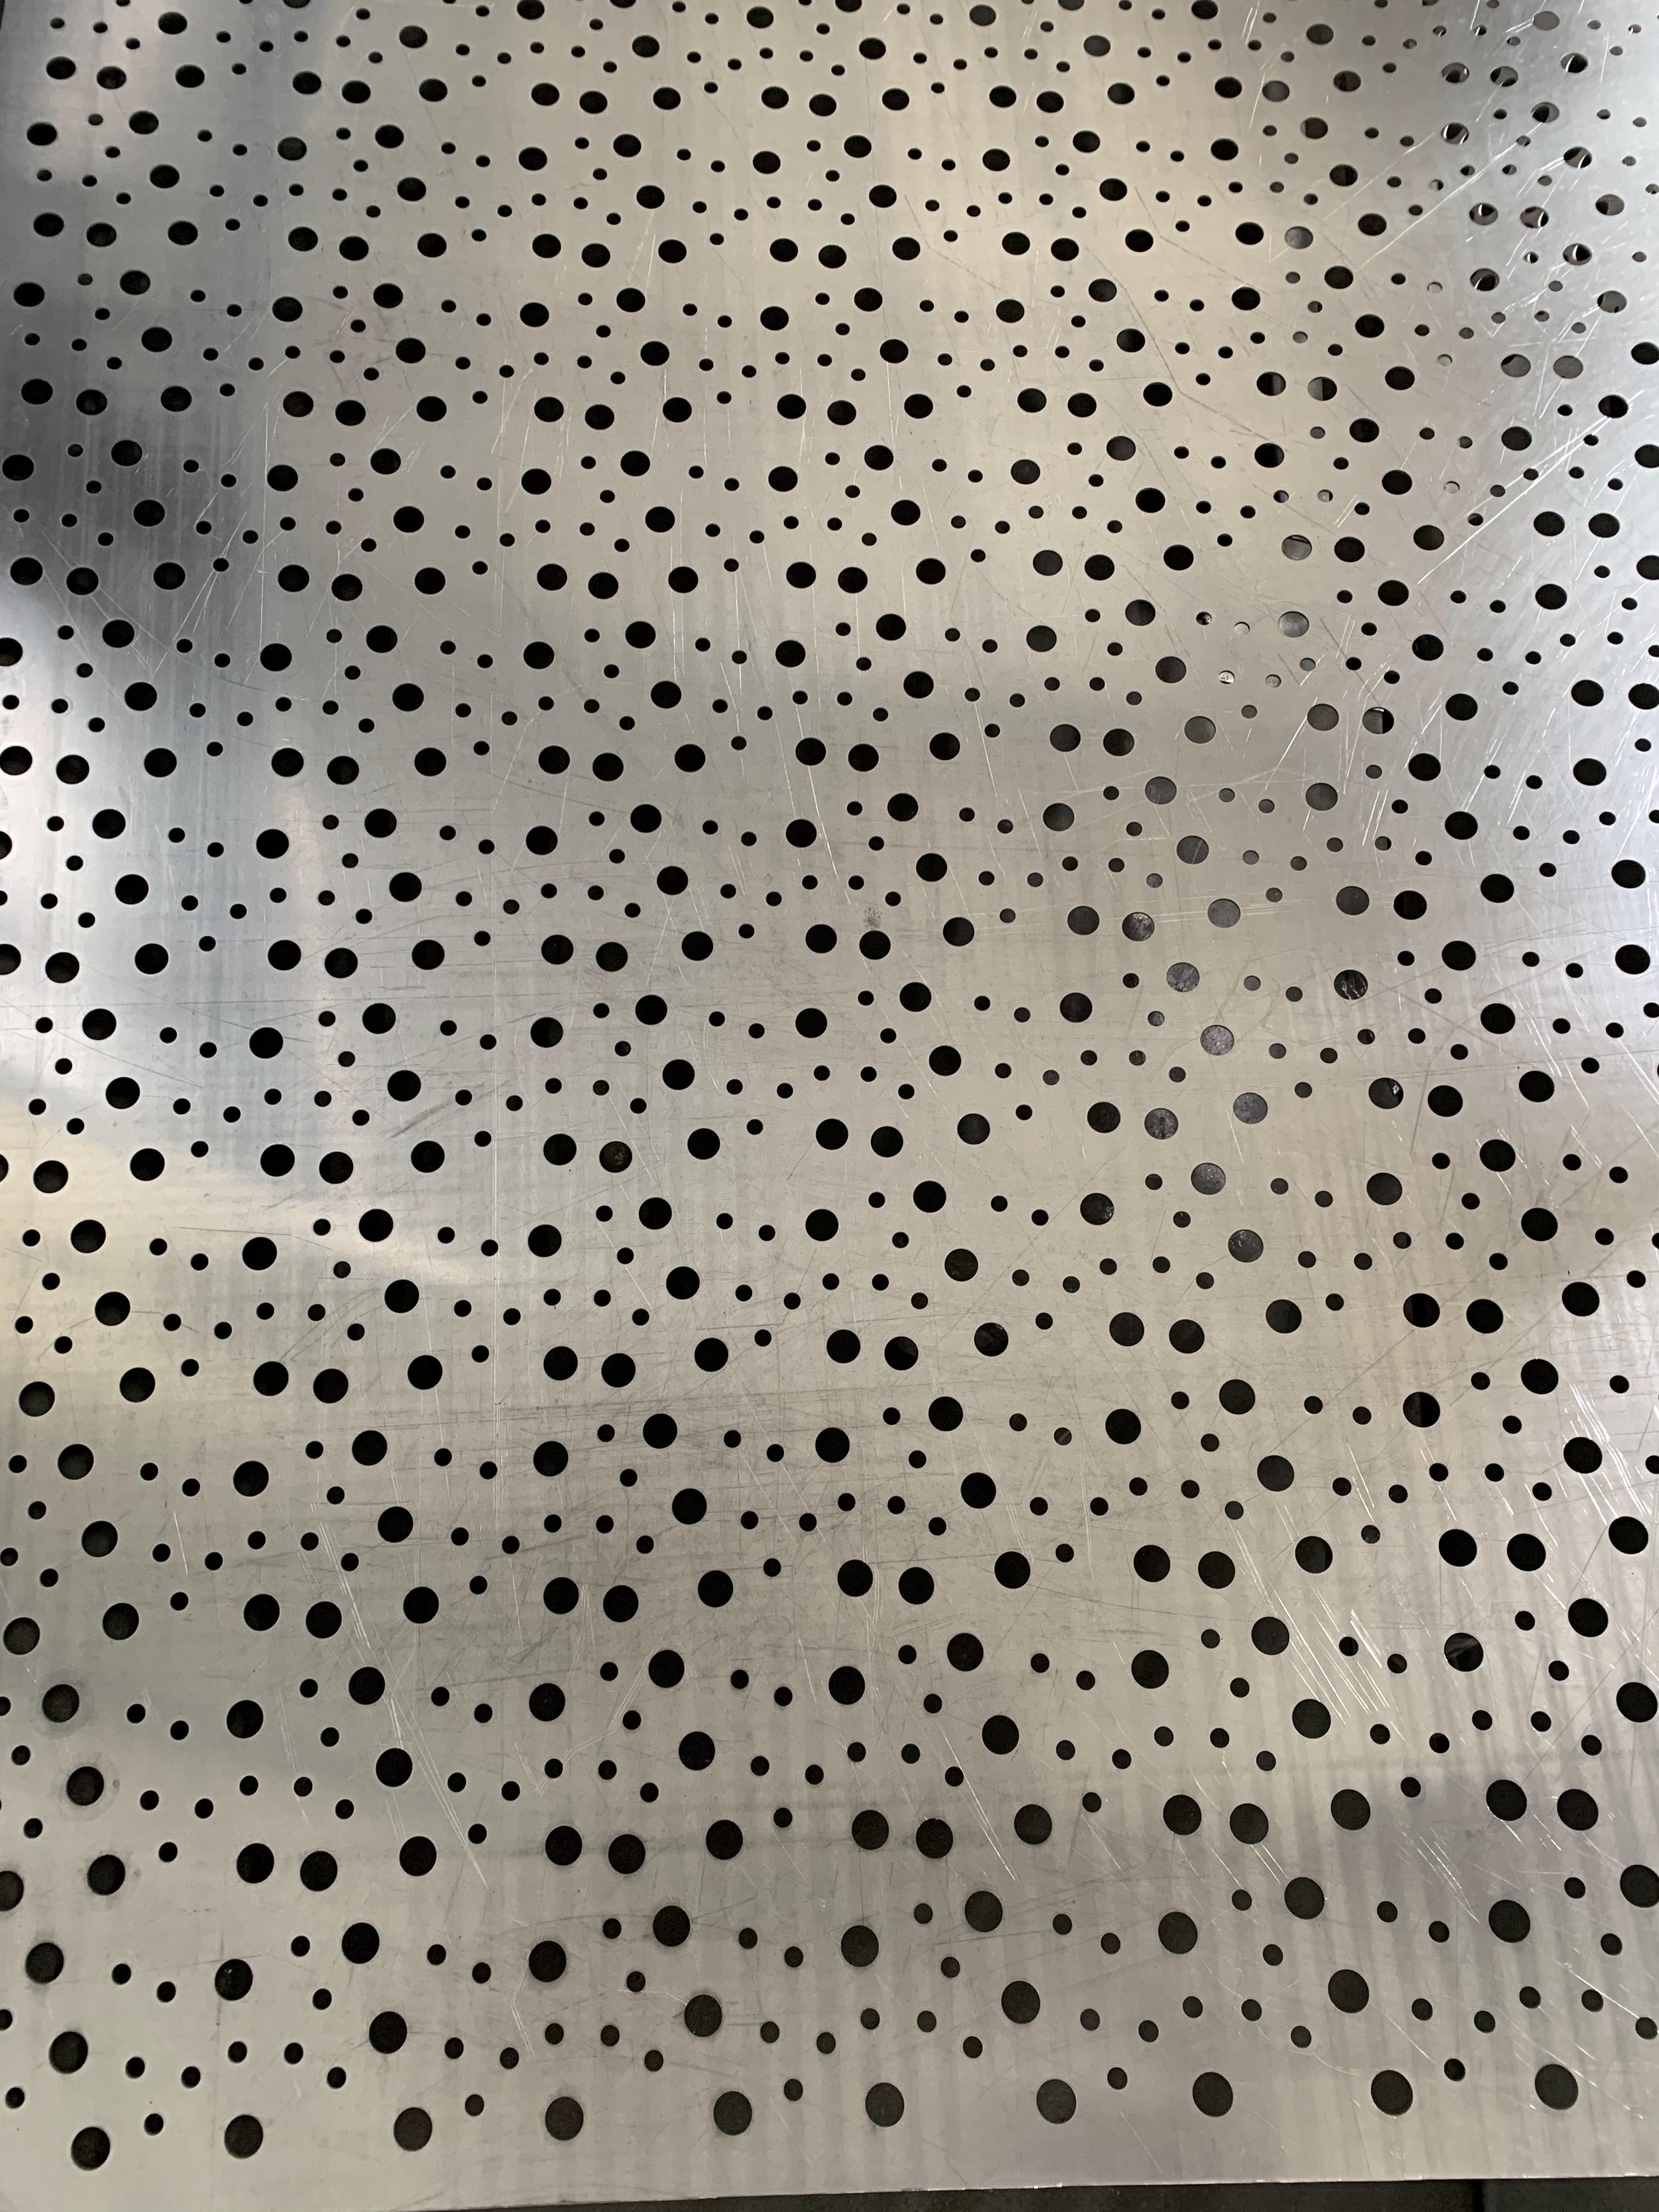 Macao Galaxy Hotel Perforated